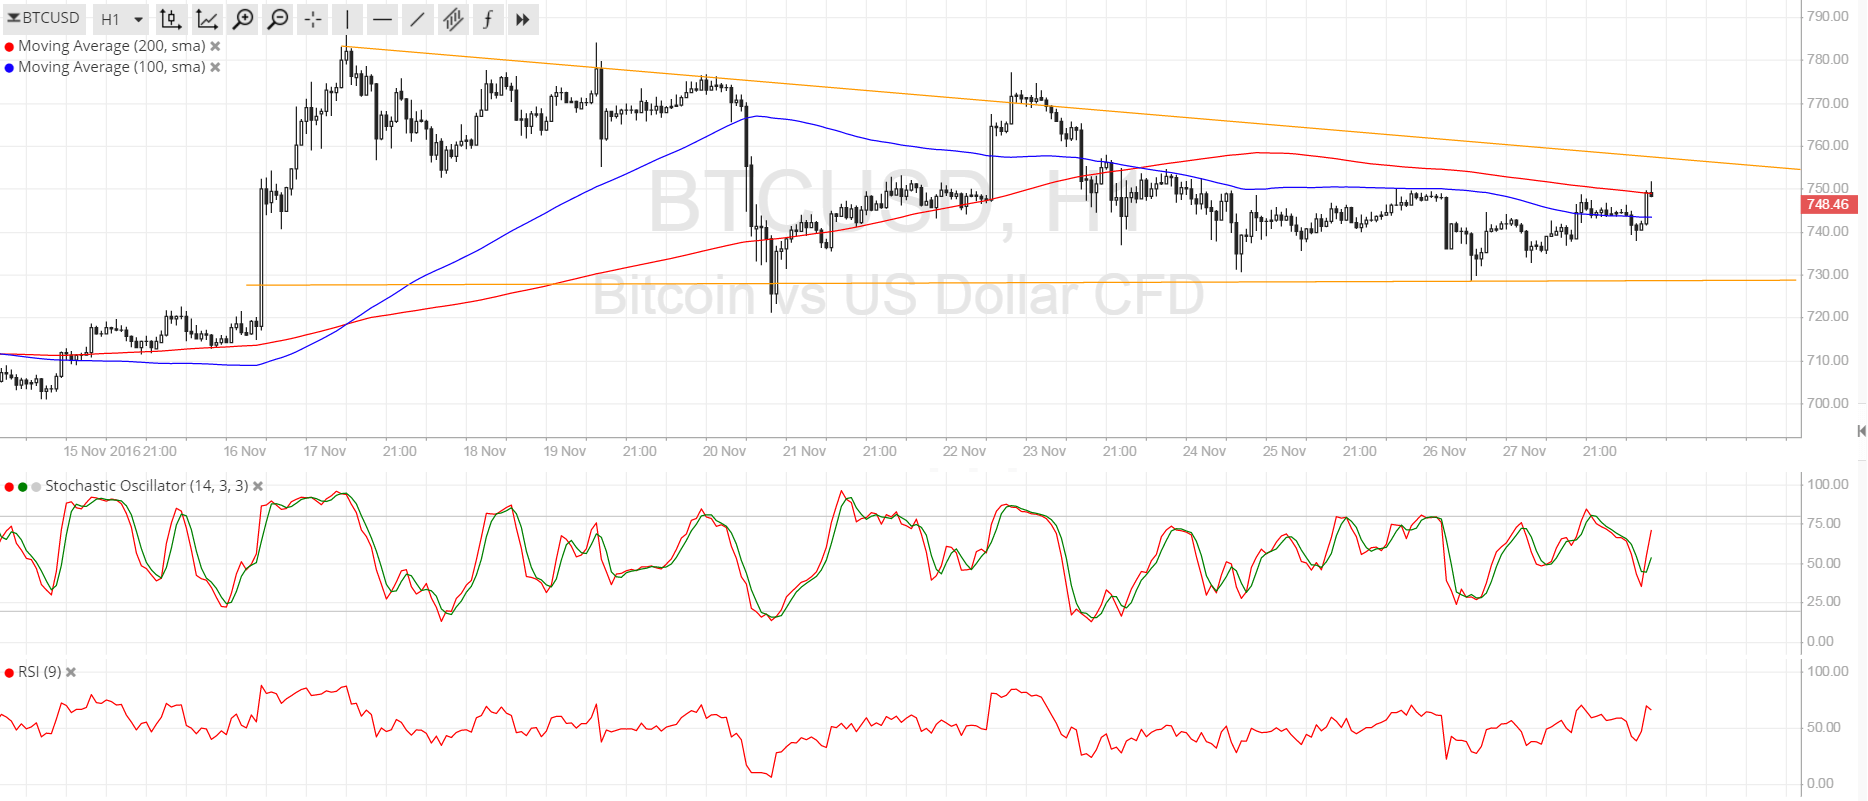 Bitcoin Price Technical Analysis for 11/28/2016 - Poised for a Breakout This Week?